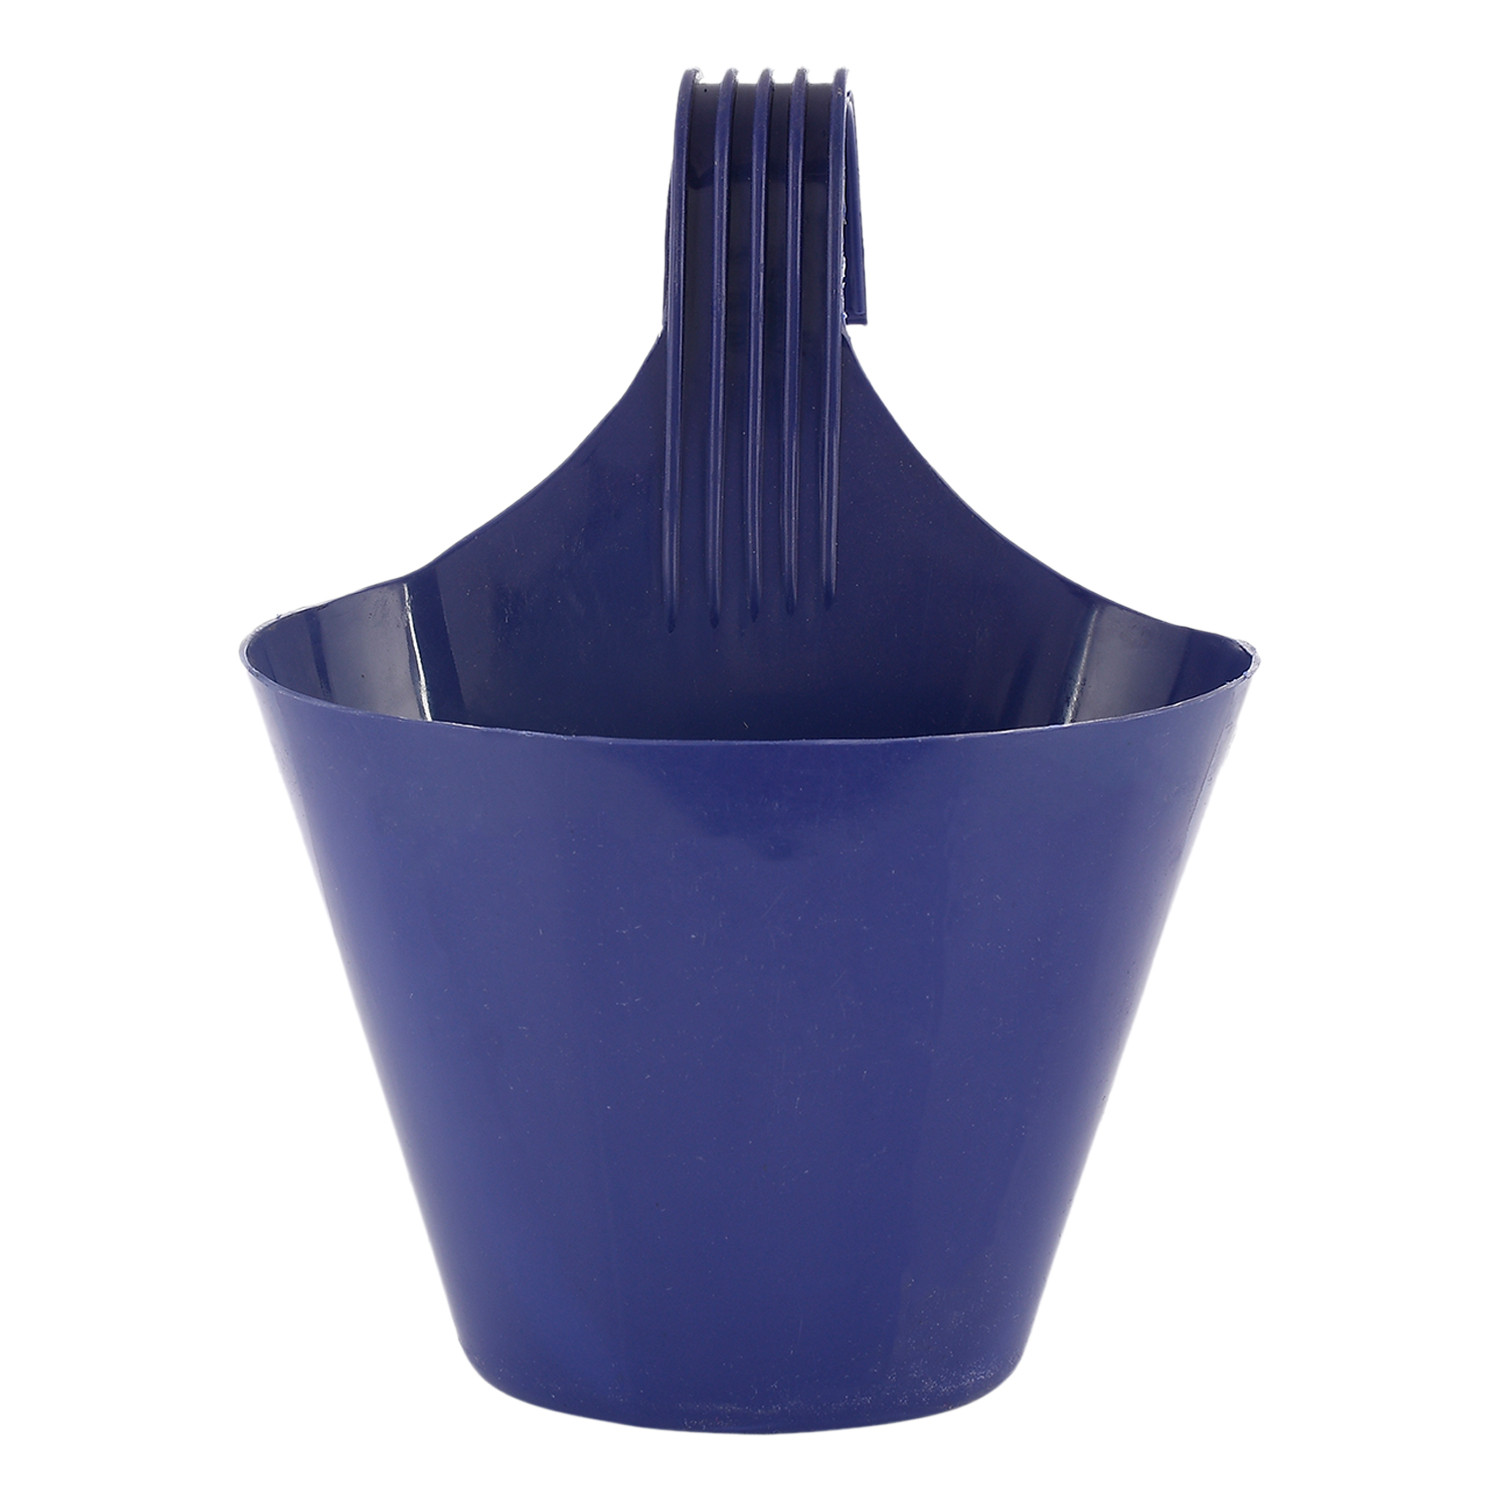 Kuber Industries Hanging Flower Pot|Single Hook Plant Container|Durable Plastic Glossy Finish Pots for Home|Balcony|Garden|9 Inch|(Blue)